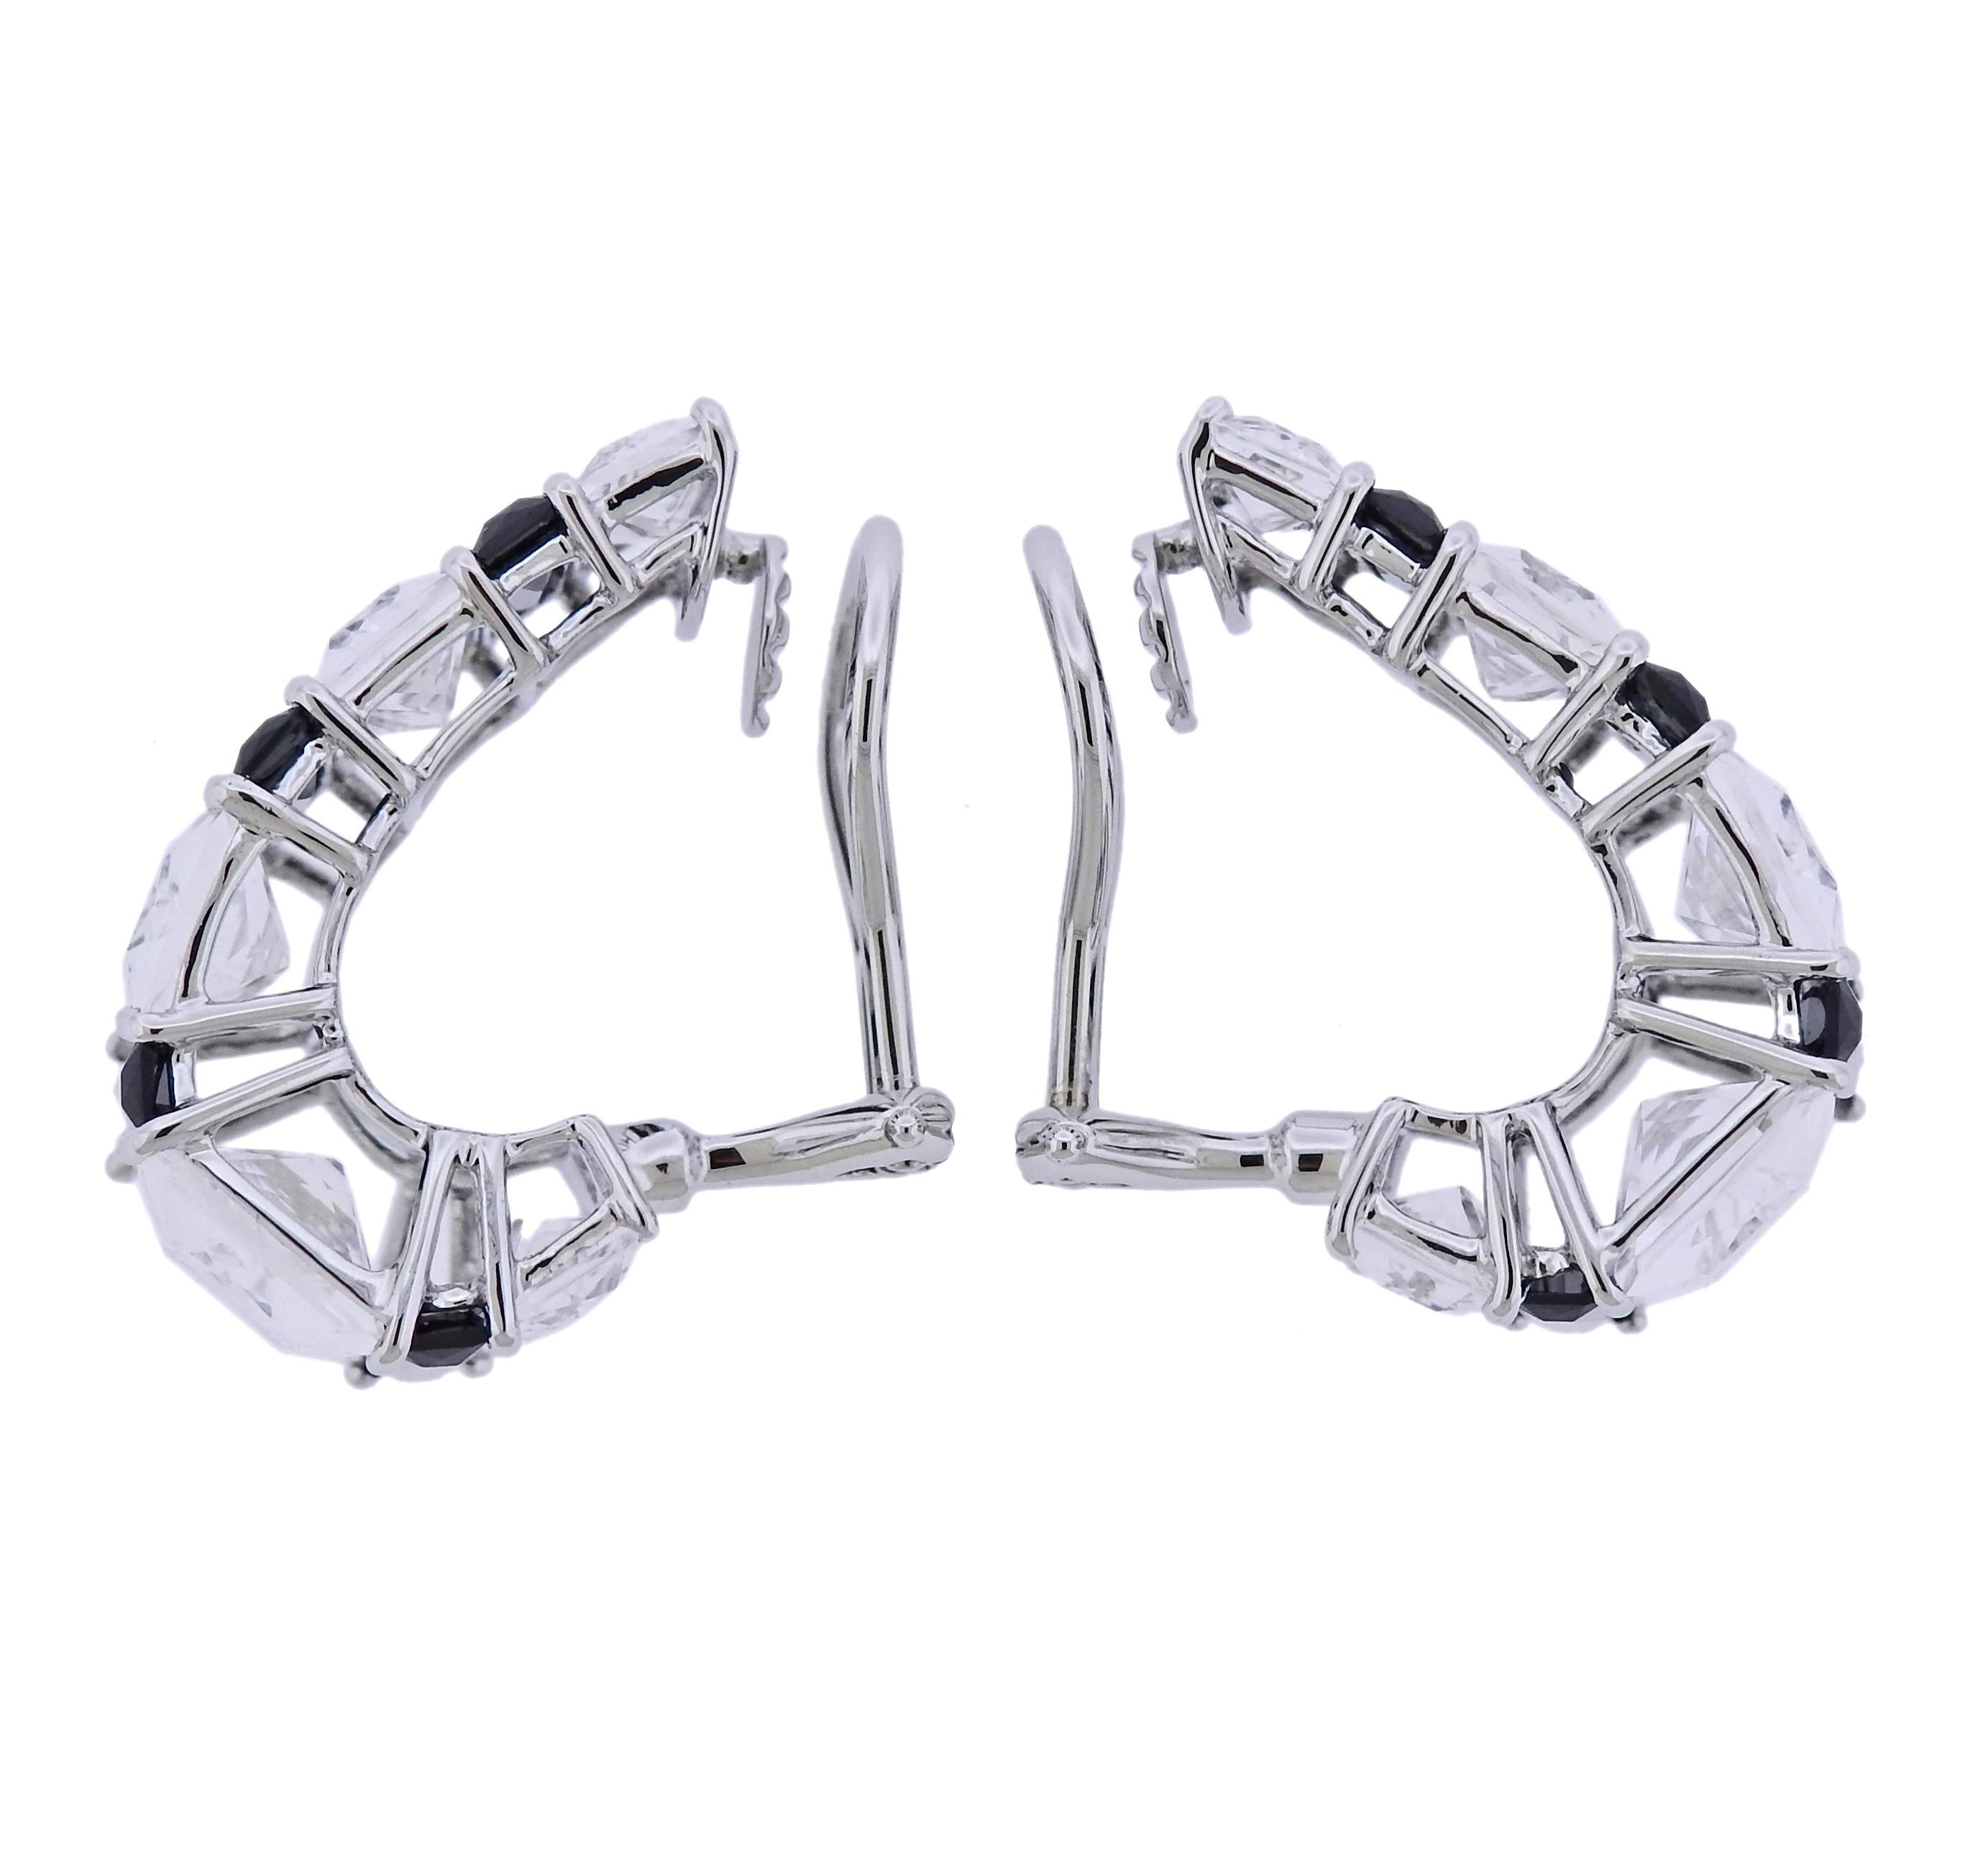 Pair of new 18k white gold half hoop earrings by Seaman Schepps, set with carve crystal and black onyx. Earrings are 23mm x 16mm, weigh 13.7 grams. Marked: 245394, 750, Shell hallmark. 